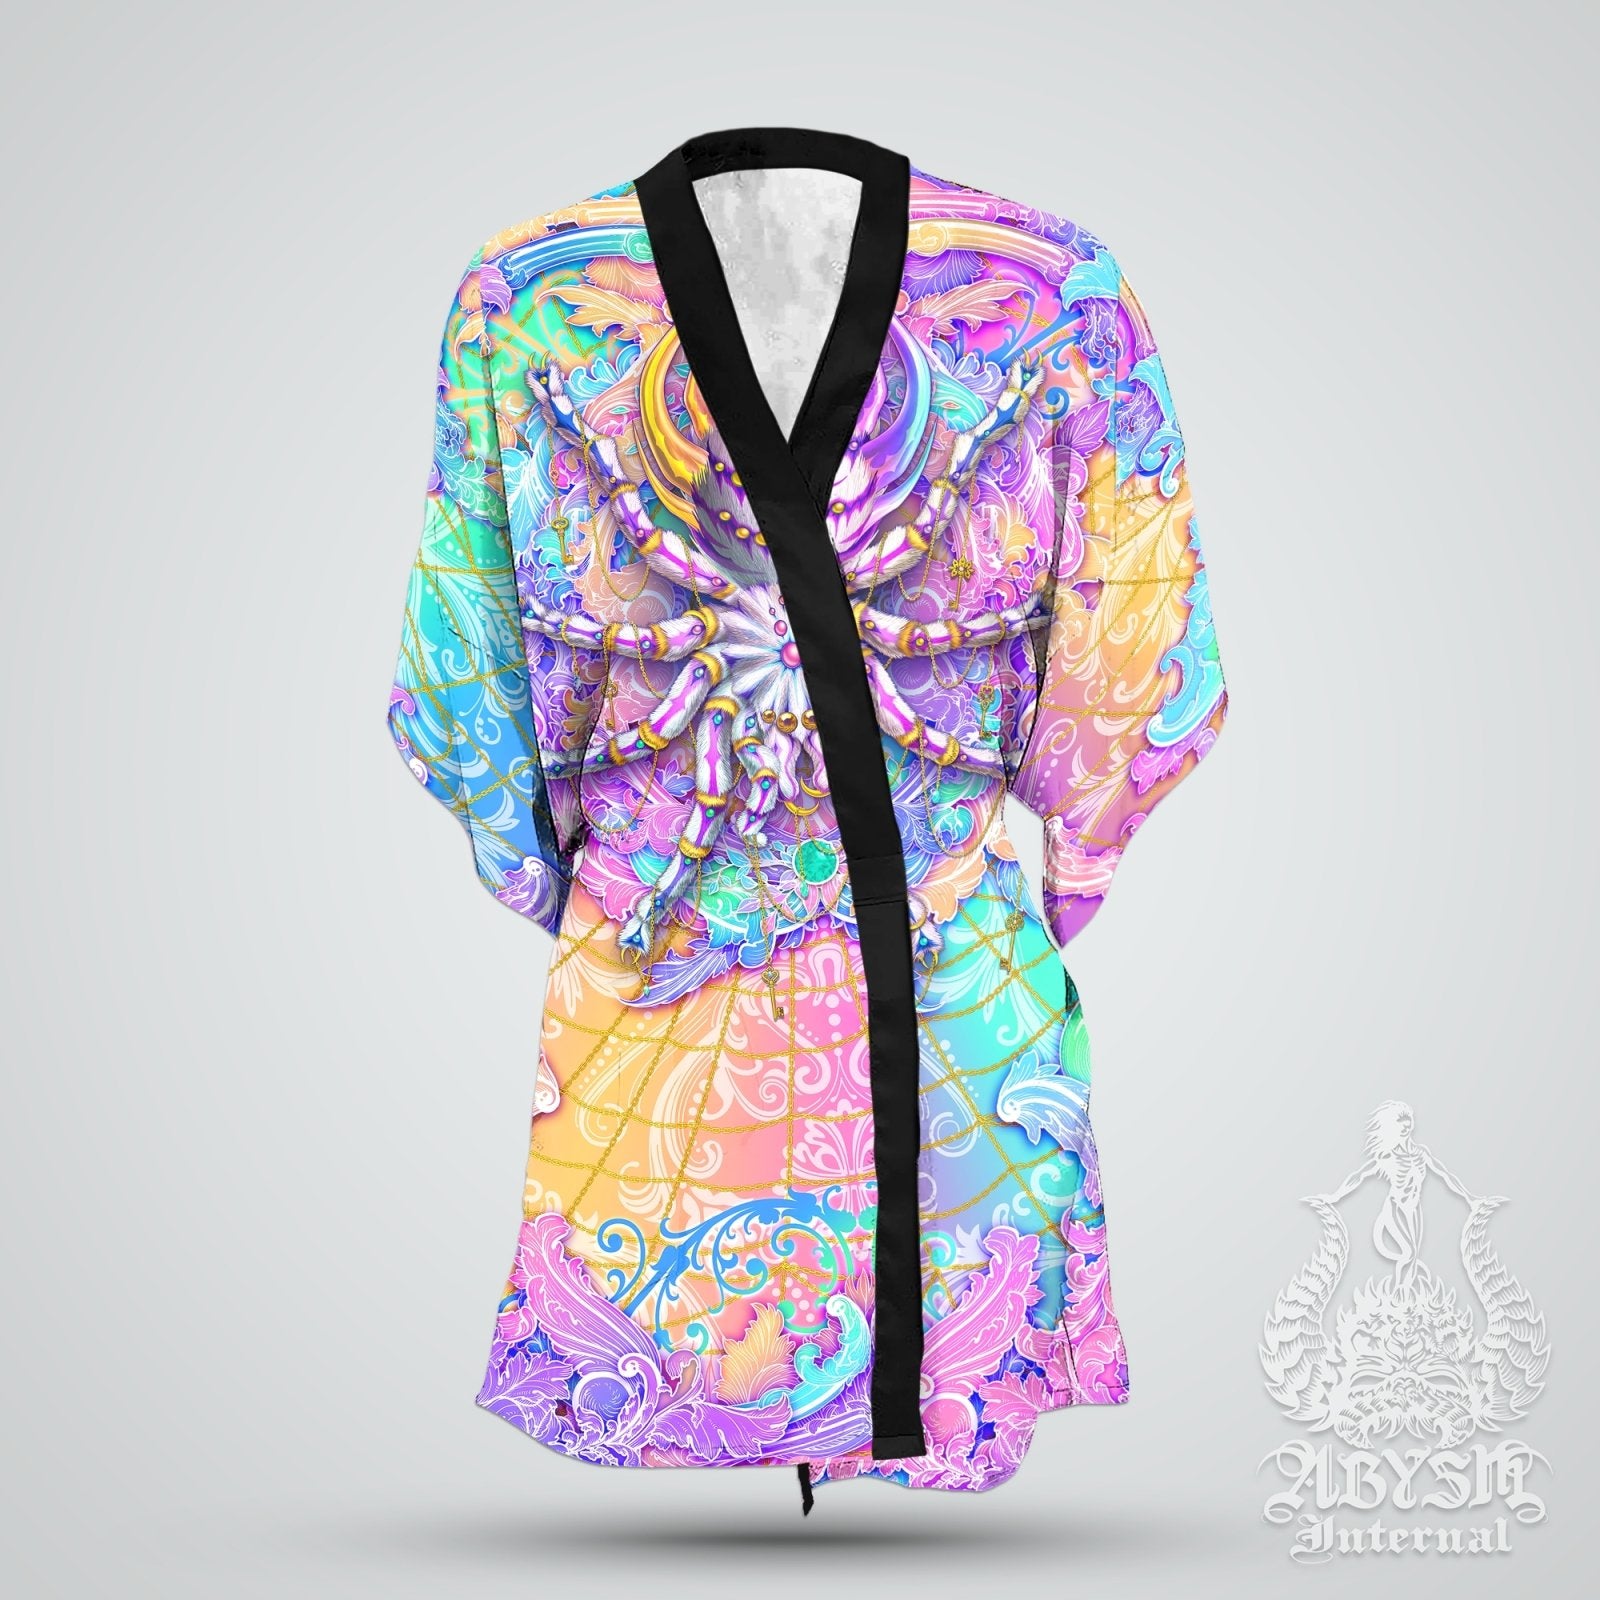 Aesthetic Cover Up, Psychedelic Beach Rave Outfit, Rave Party Kimono, Summer Festival Robe, Holographic Pastel Clothing, Unisex - Tarantula Spider - Abysm Internal